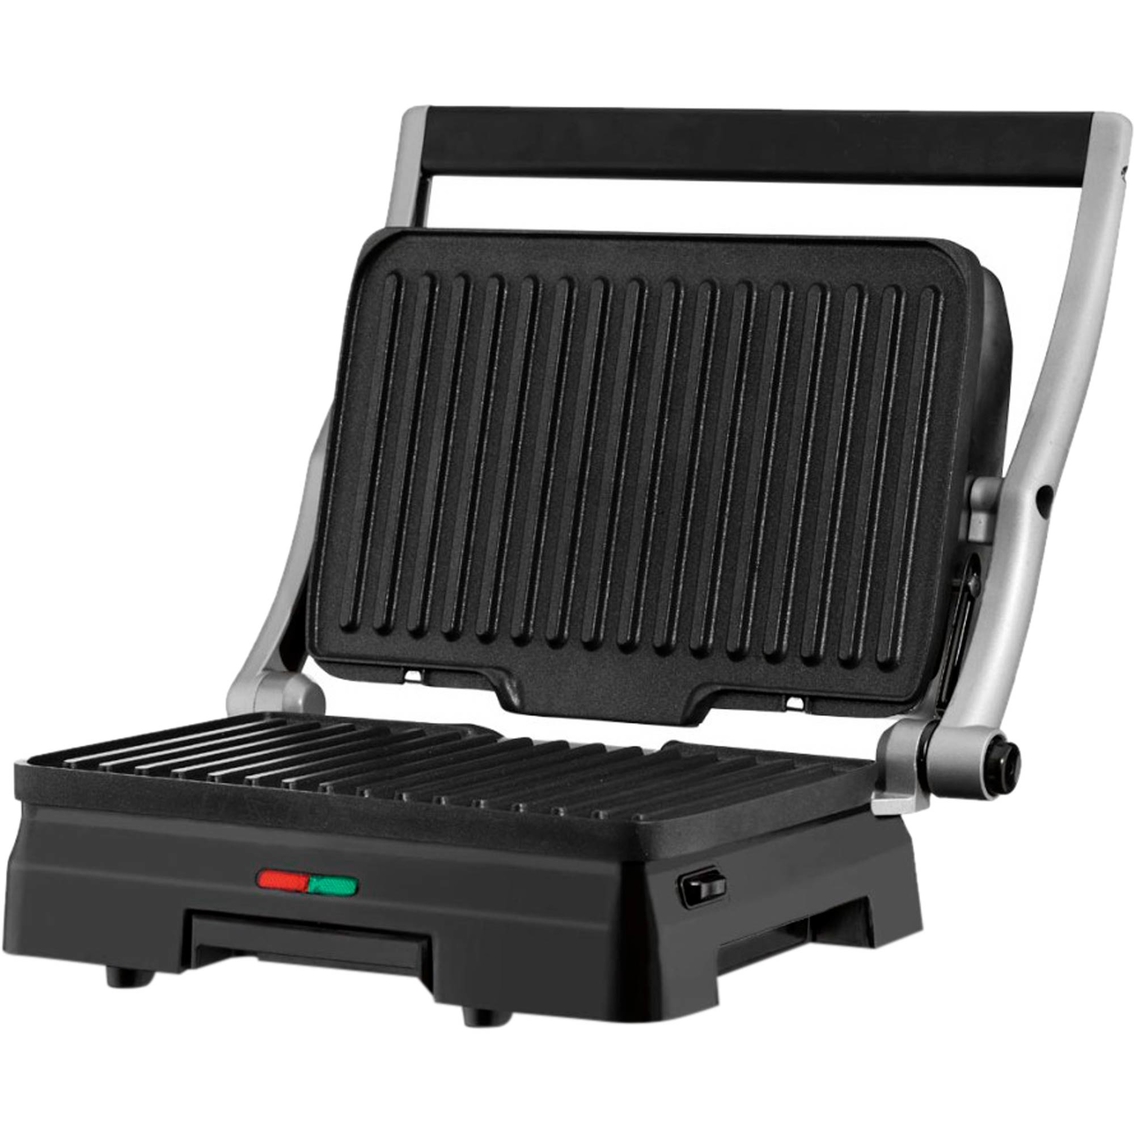 Cuisinart Griddler Grill and Panini Press - Image 4 of 5